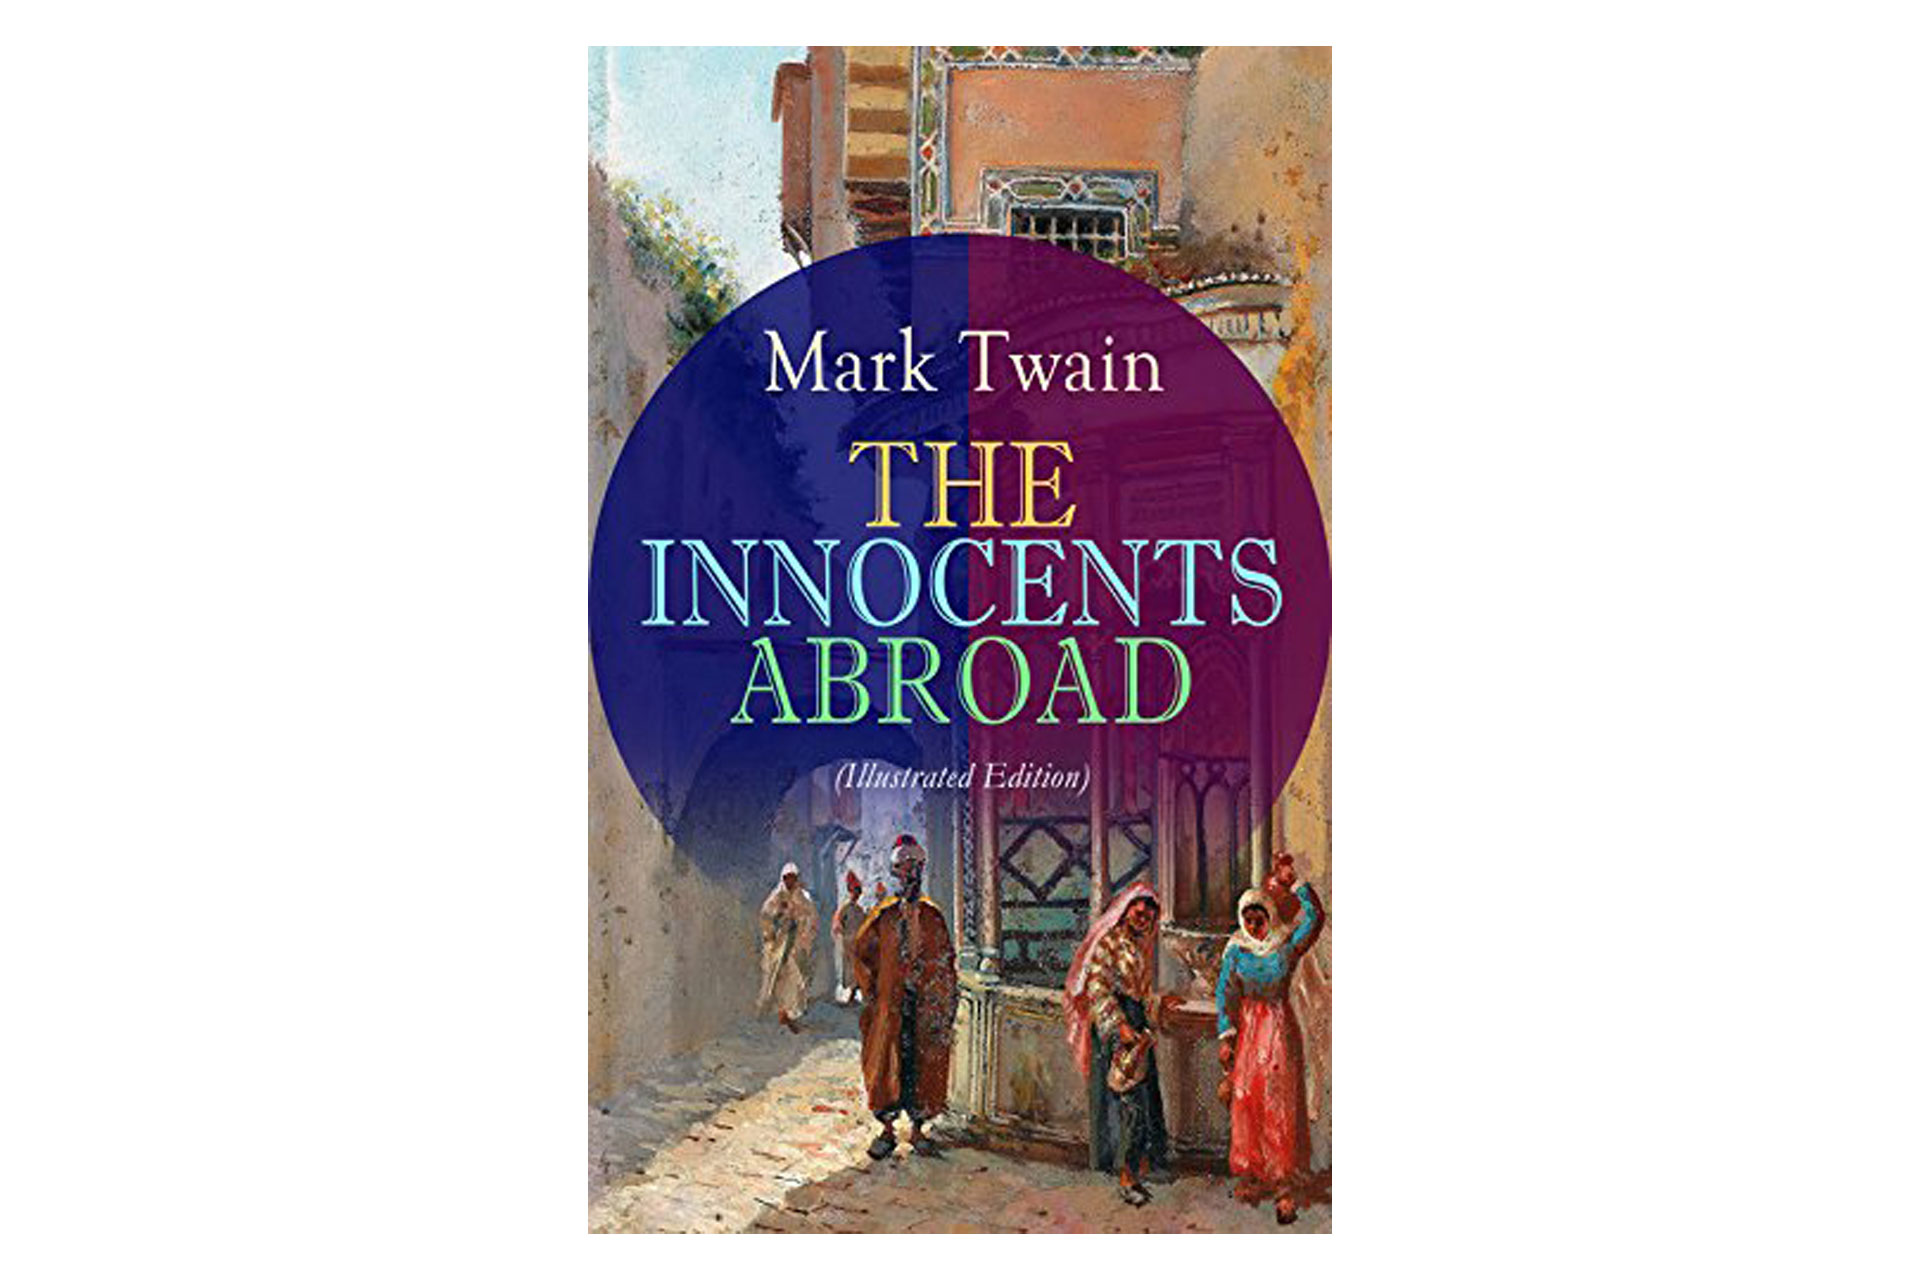 Innocents Abroad Book; Courtesy of Amazon